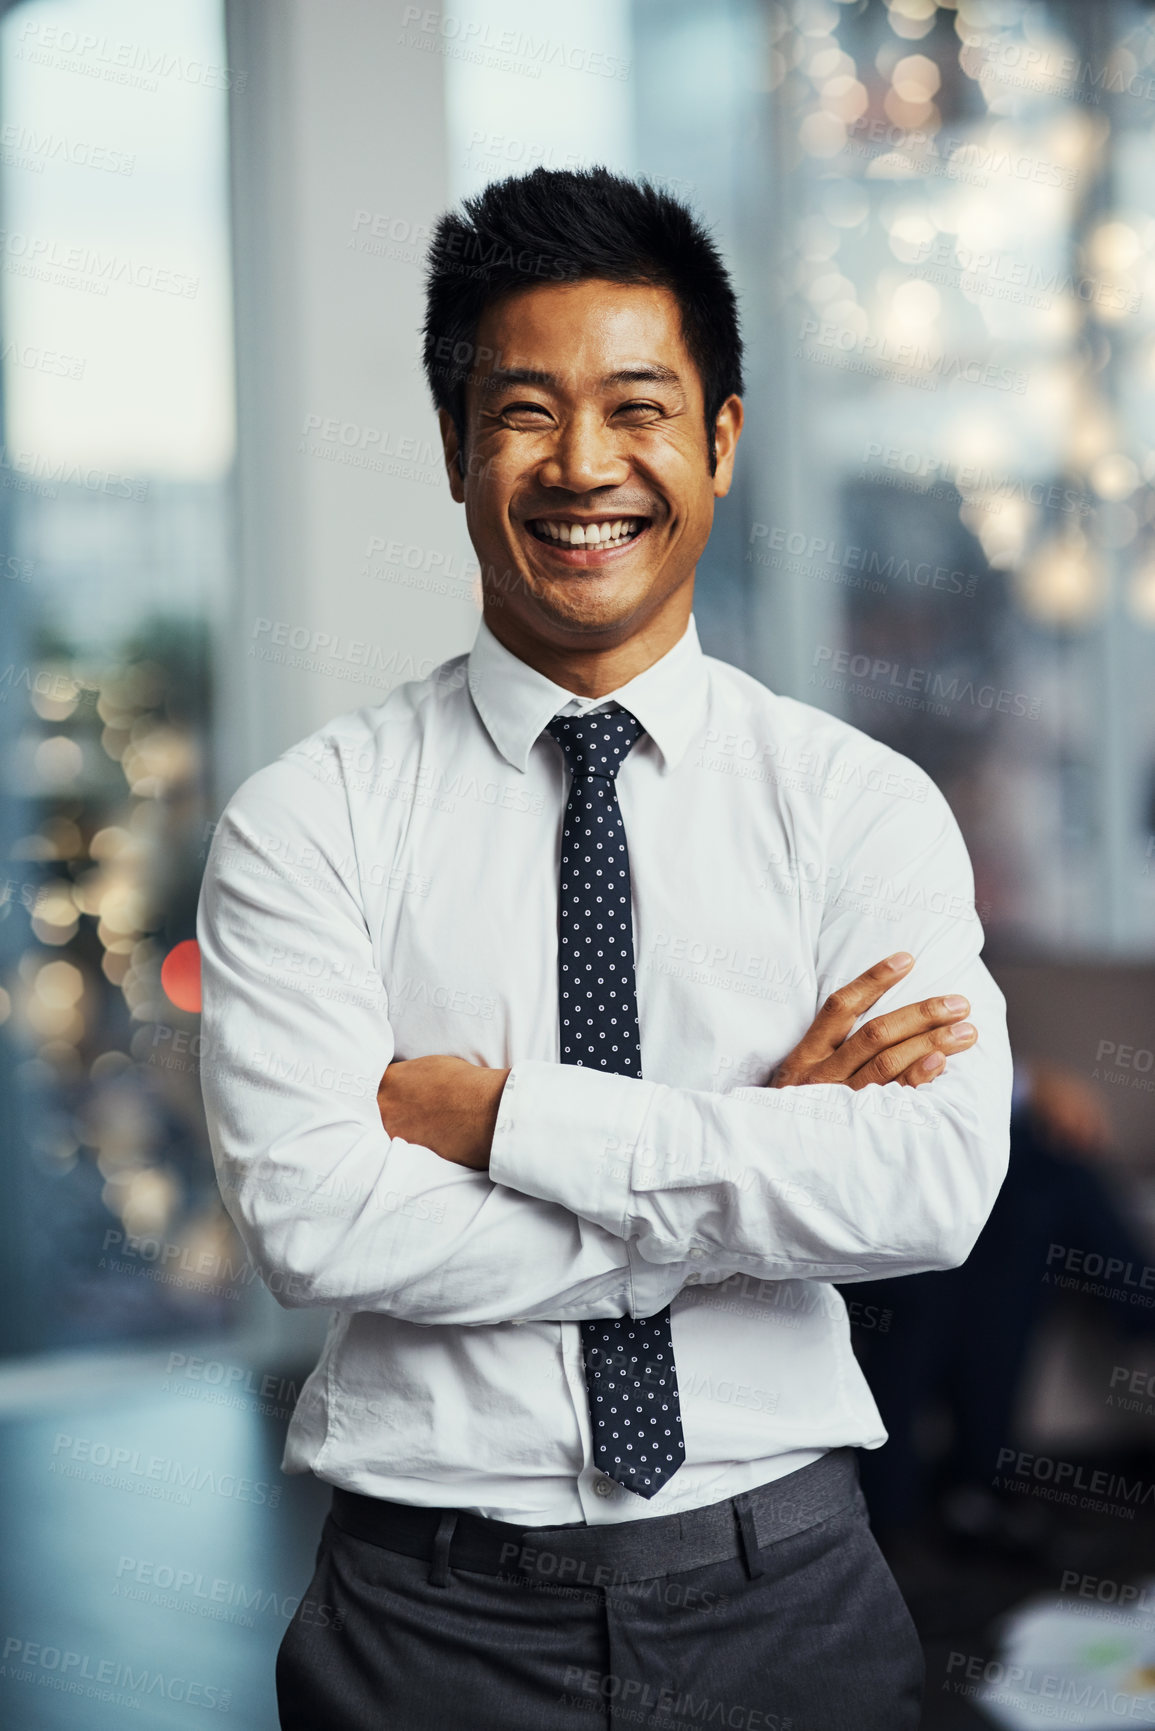 Buy stock photo Portrait of a well-dressed businessman standing in a office